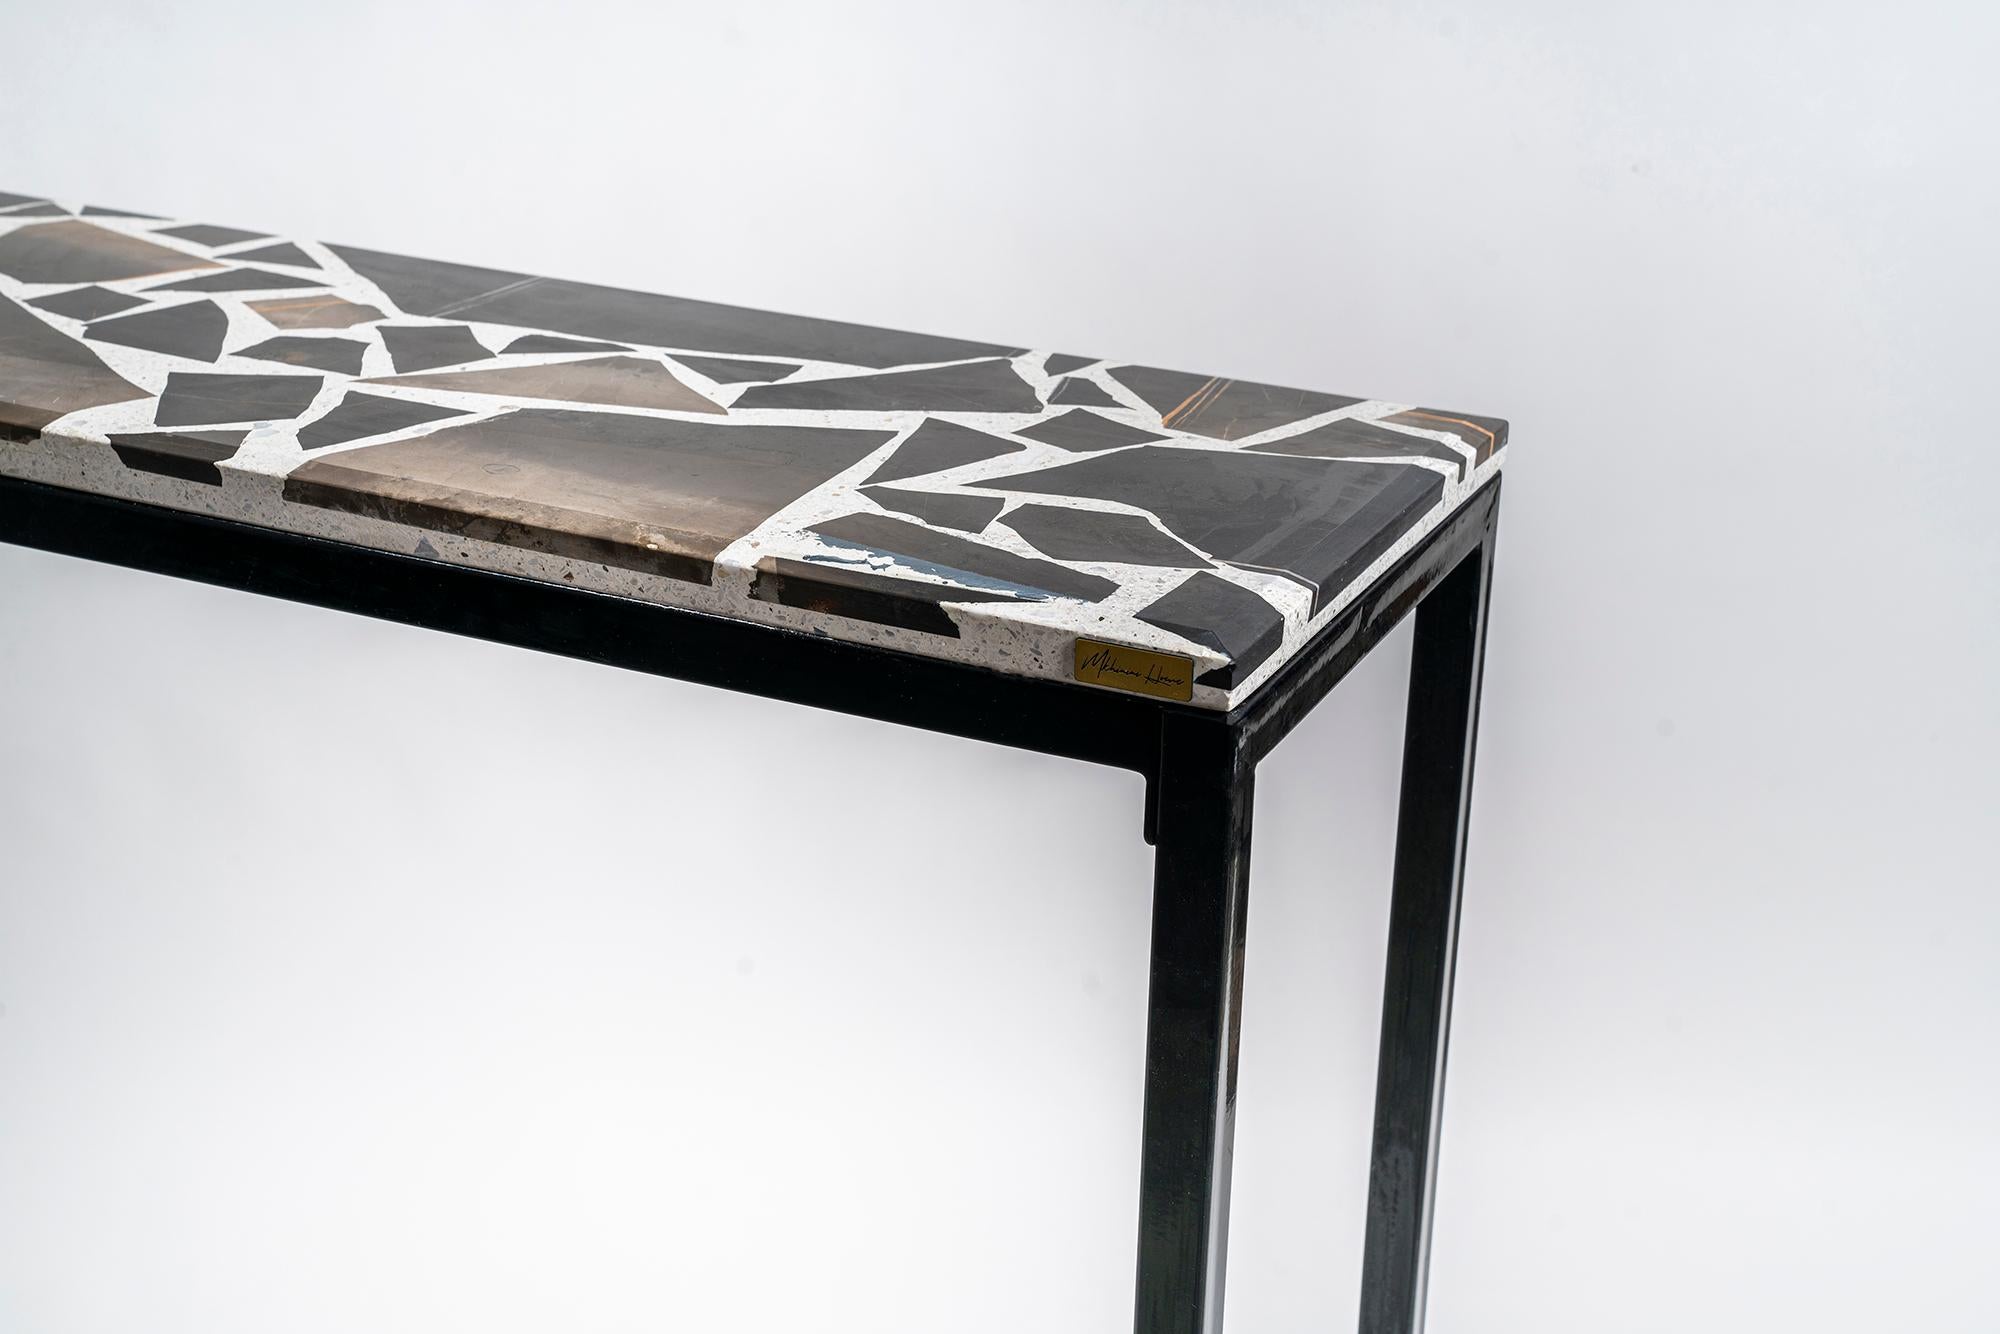 The magical union of Terrazzo and black steel gives this console table a refined elegance. Its minimalist appearance gives it both a modern character and a graceful allure.
Entirely handmade, this Console table with a unique Terrazzo top,